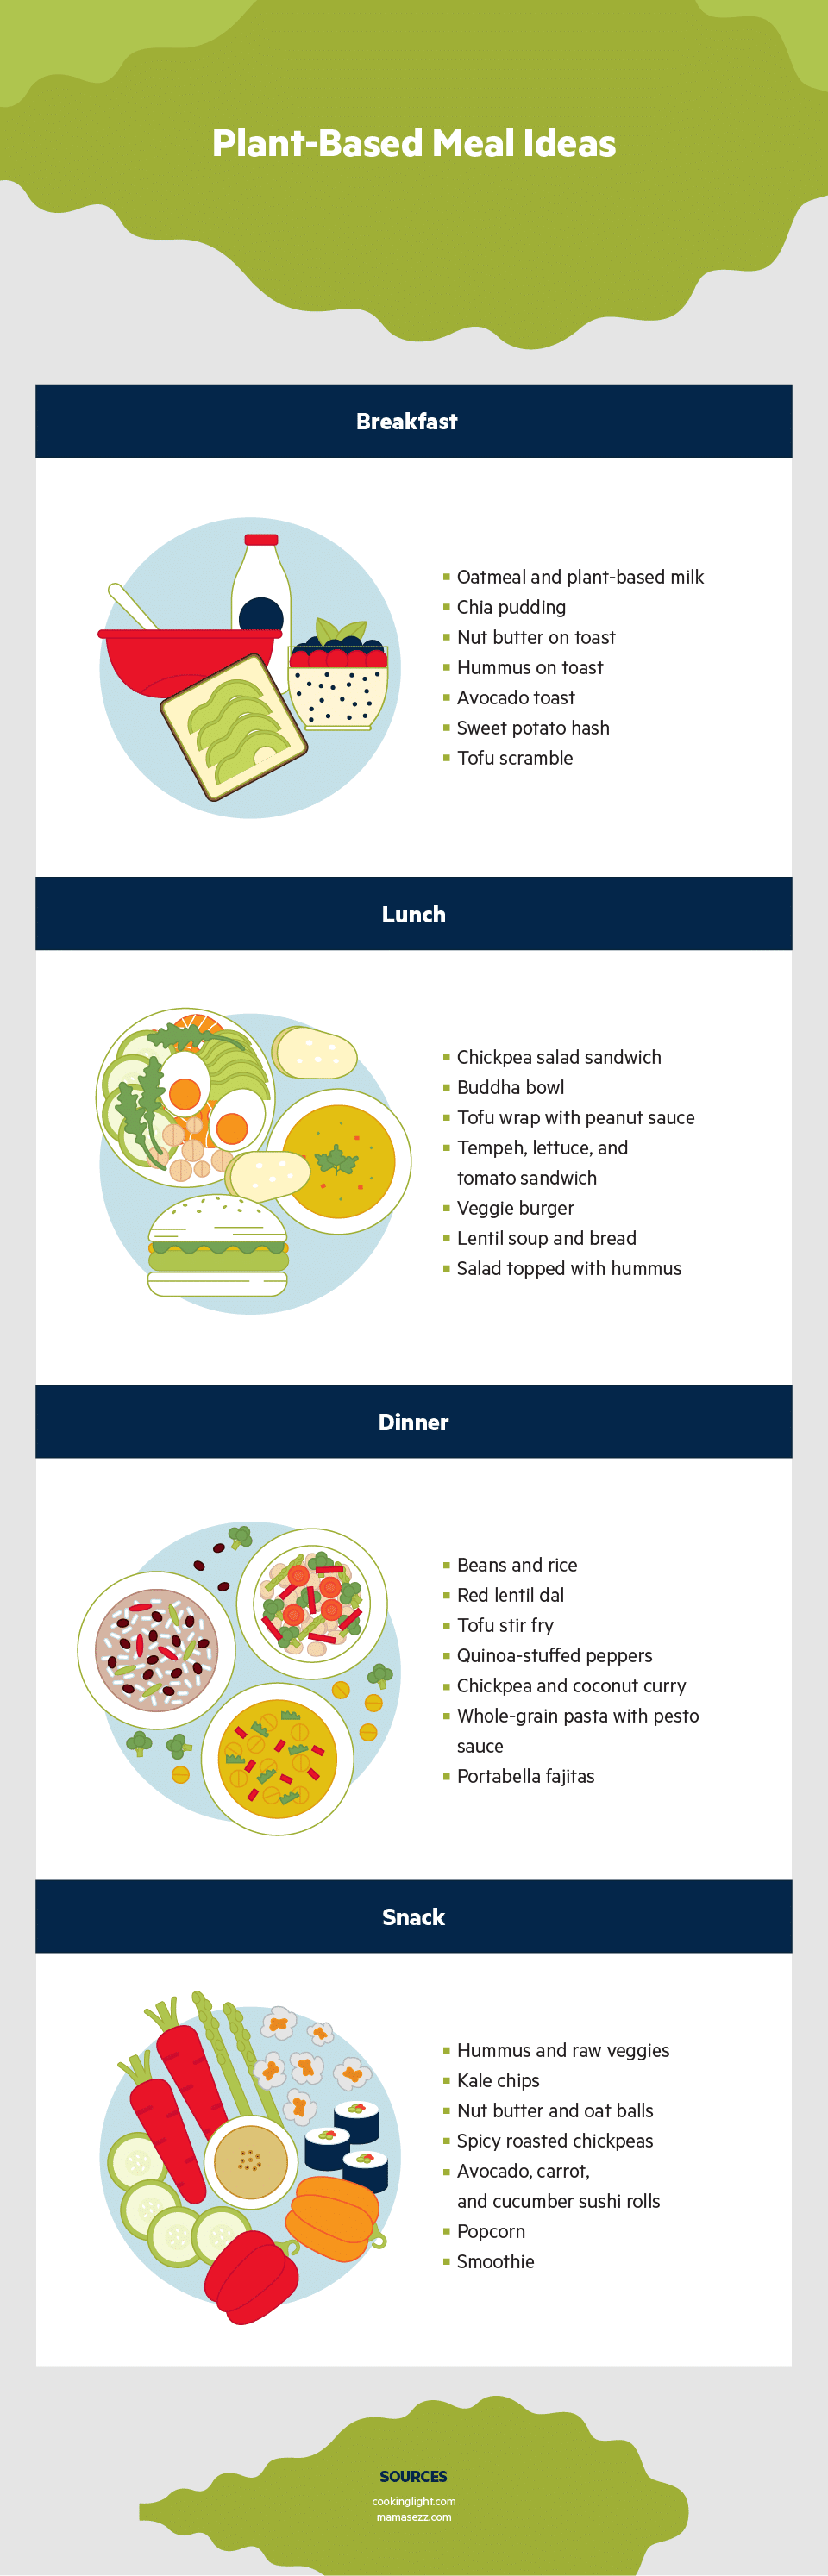 Plant-Based Meal Ideas